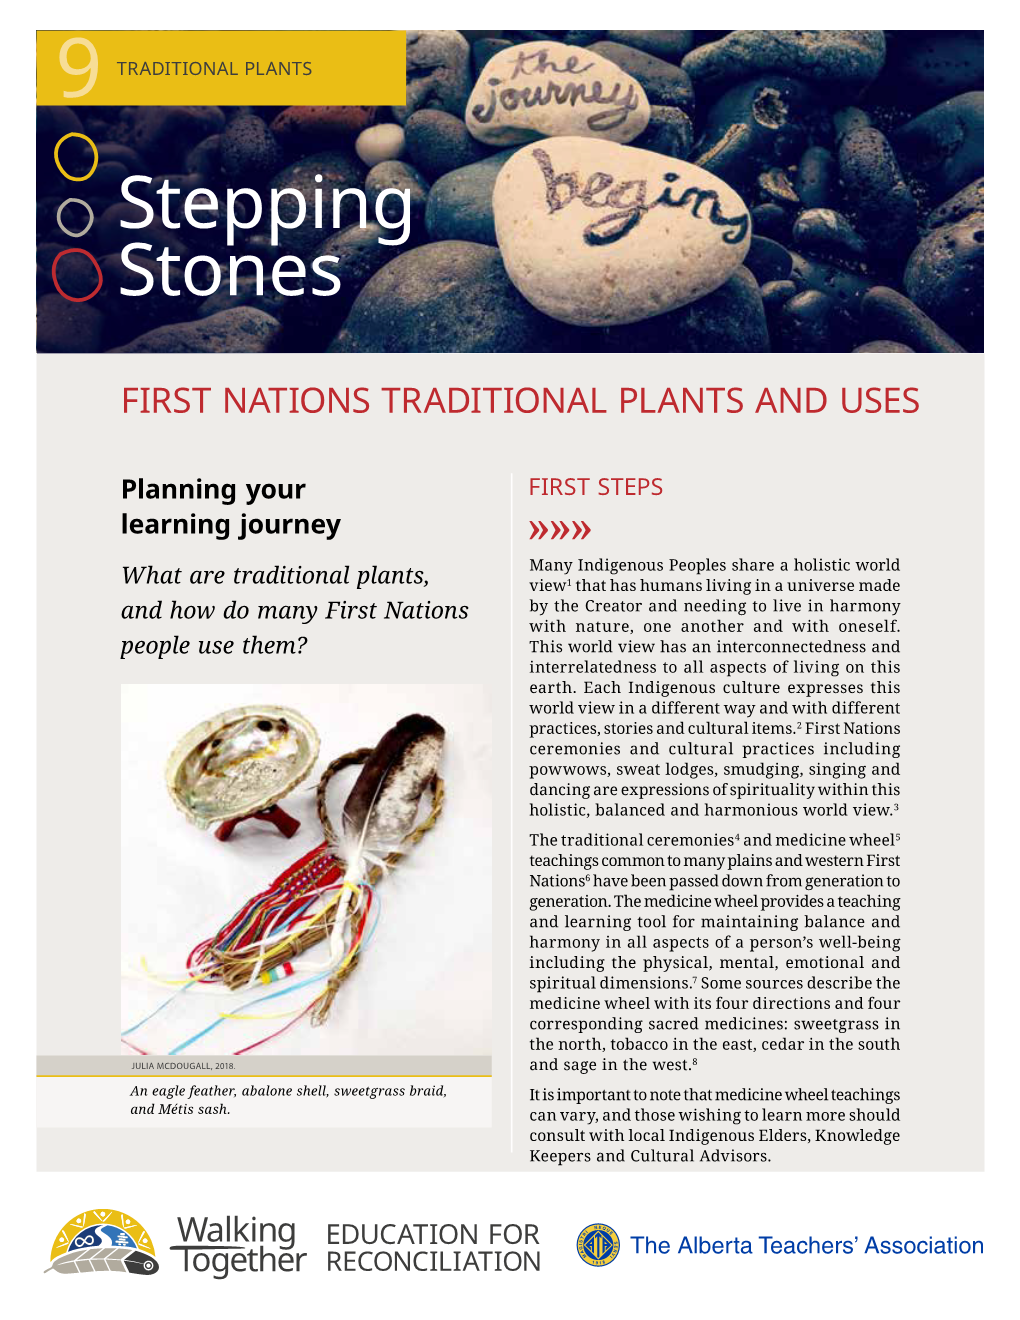 First Nations Traditional Plants and Uses